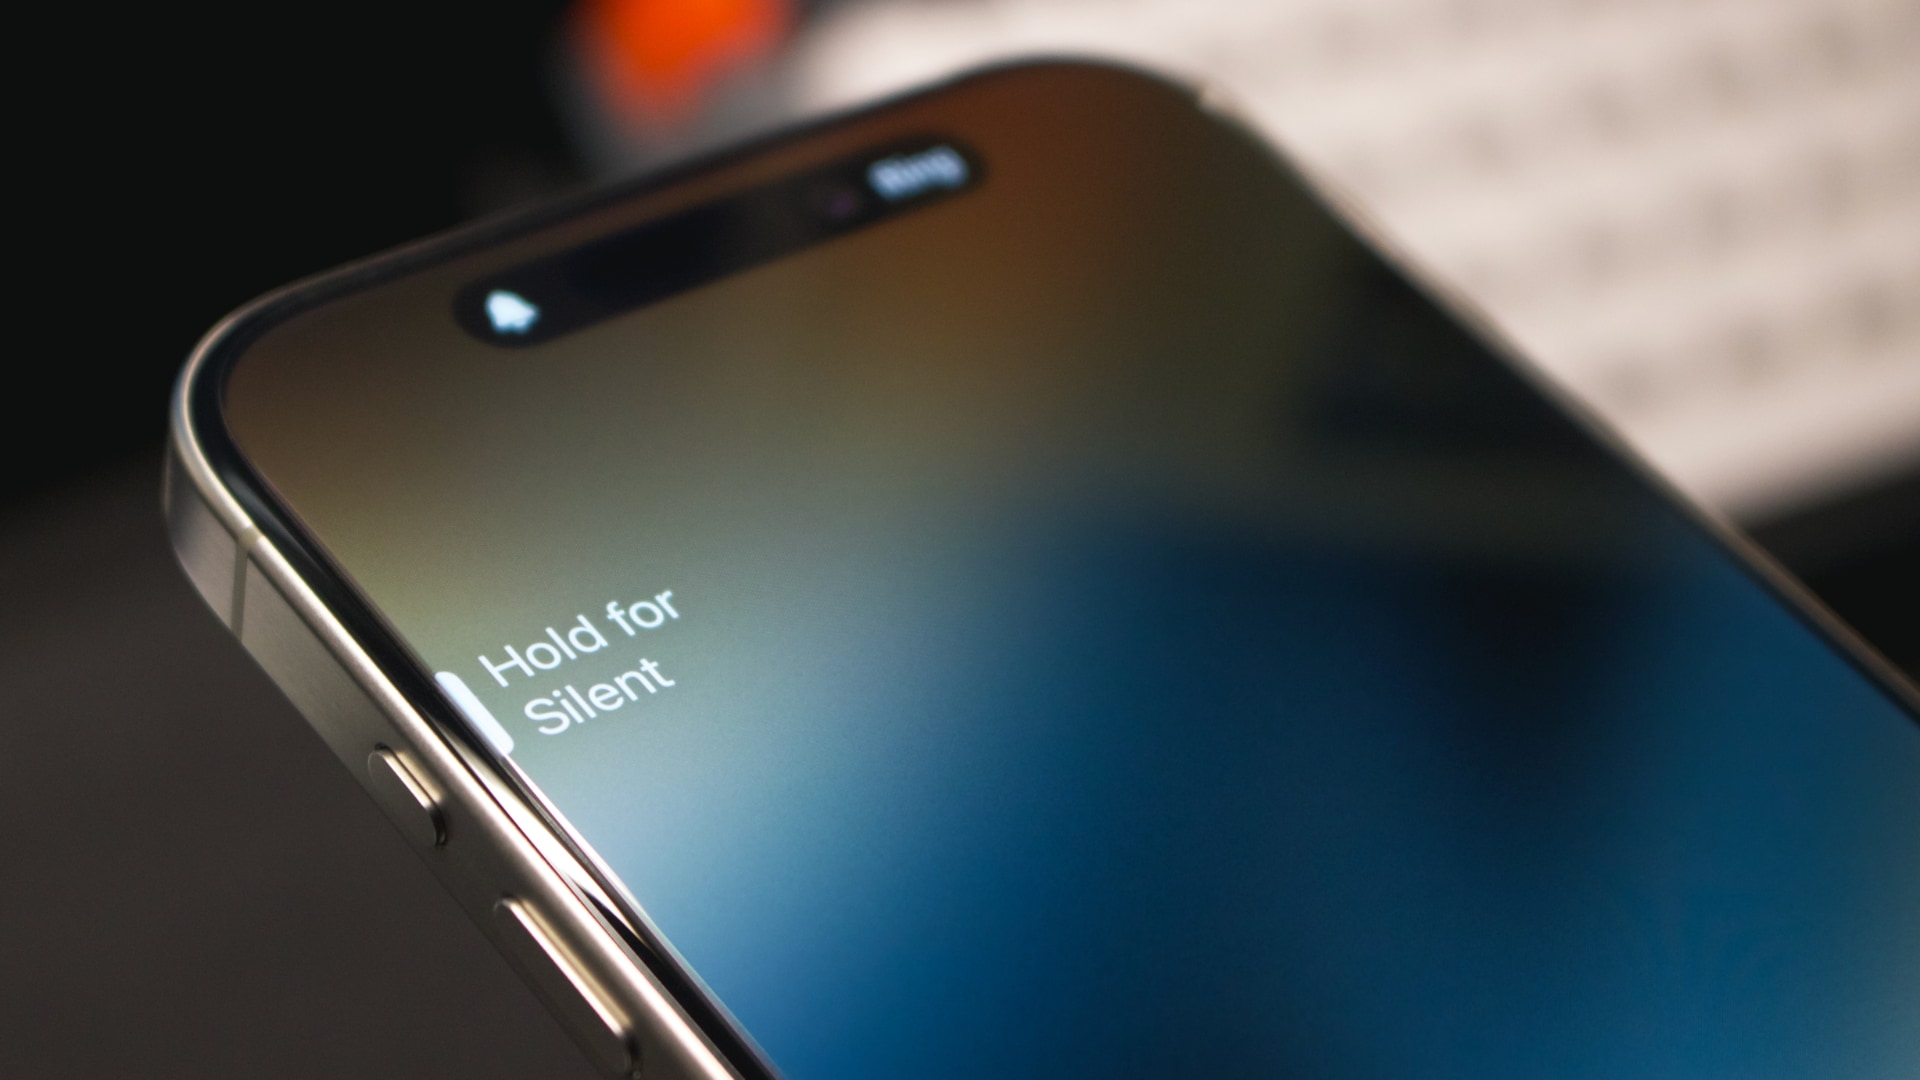 Closeup of the iPhone's Action button with the "Hold for silent" message 